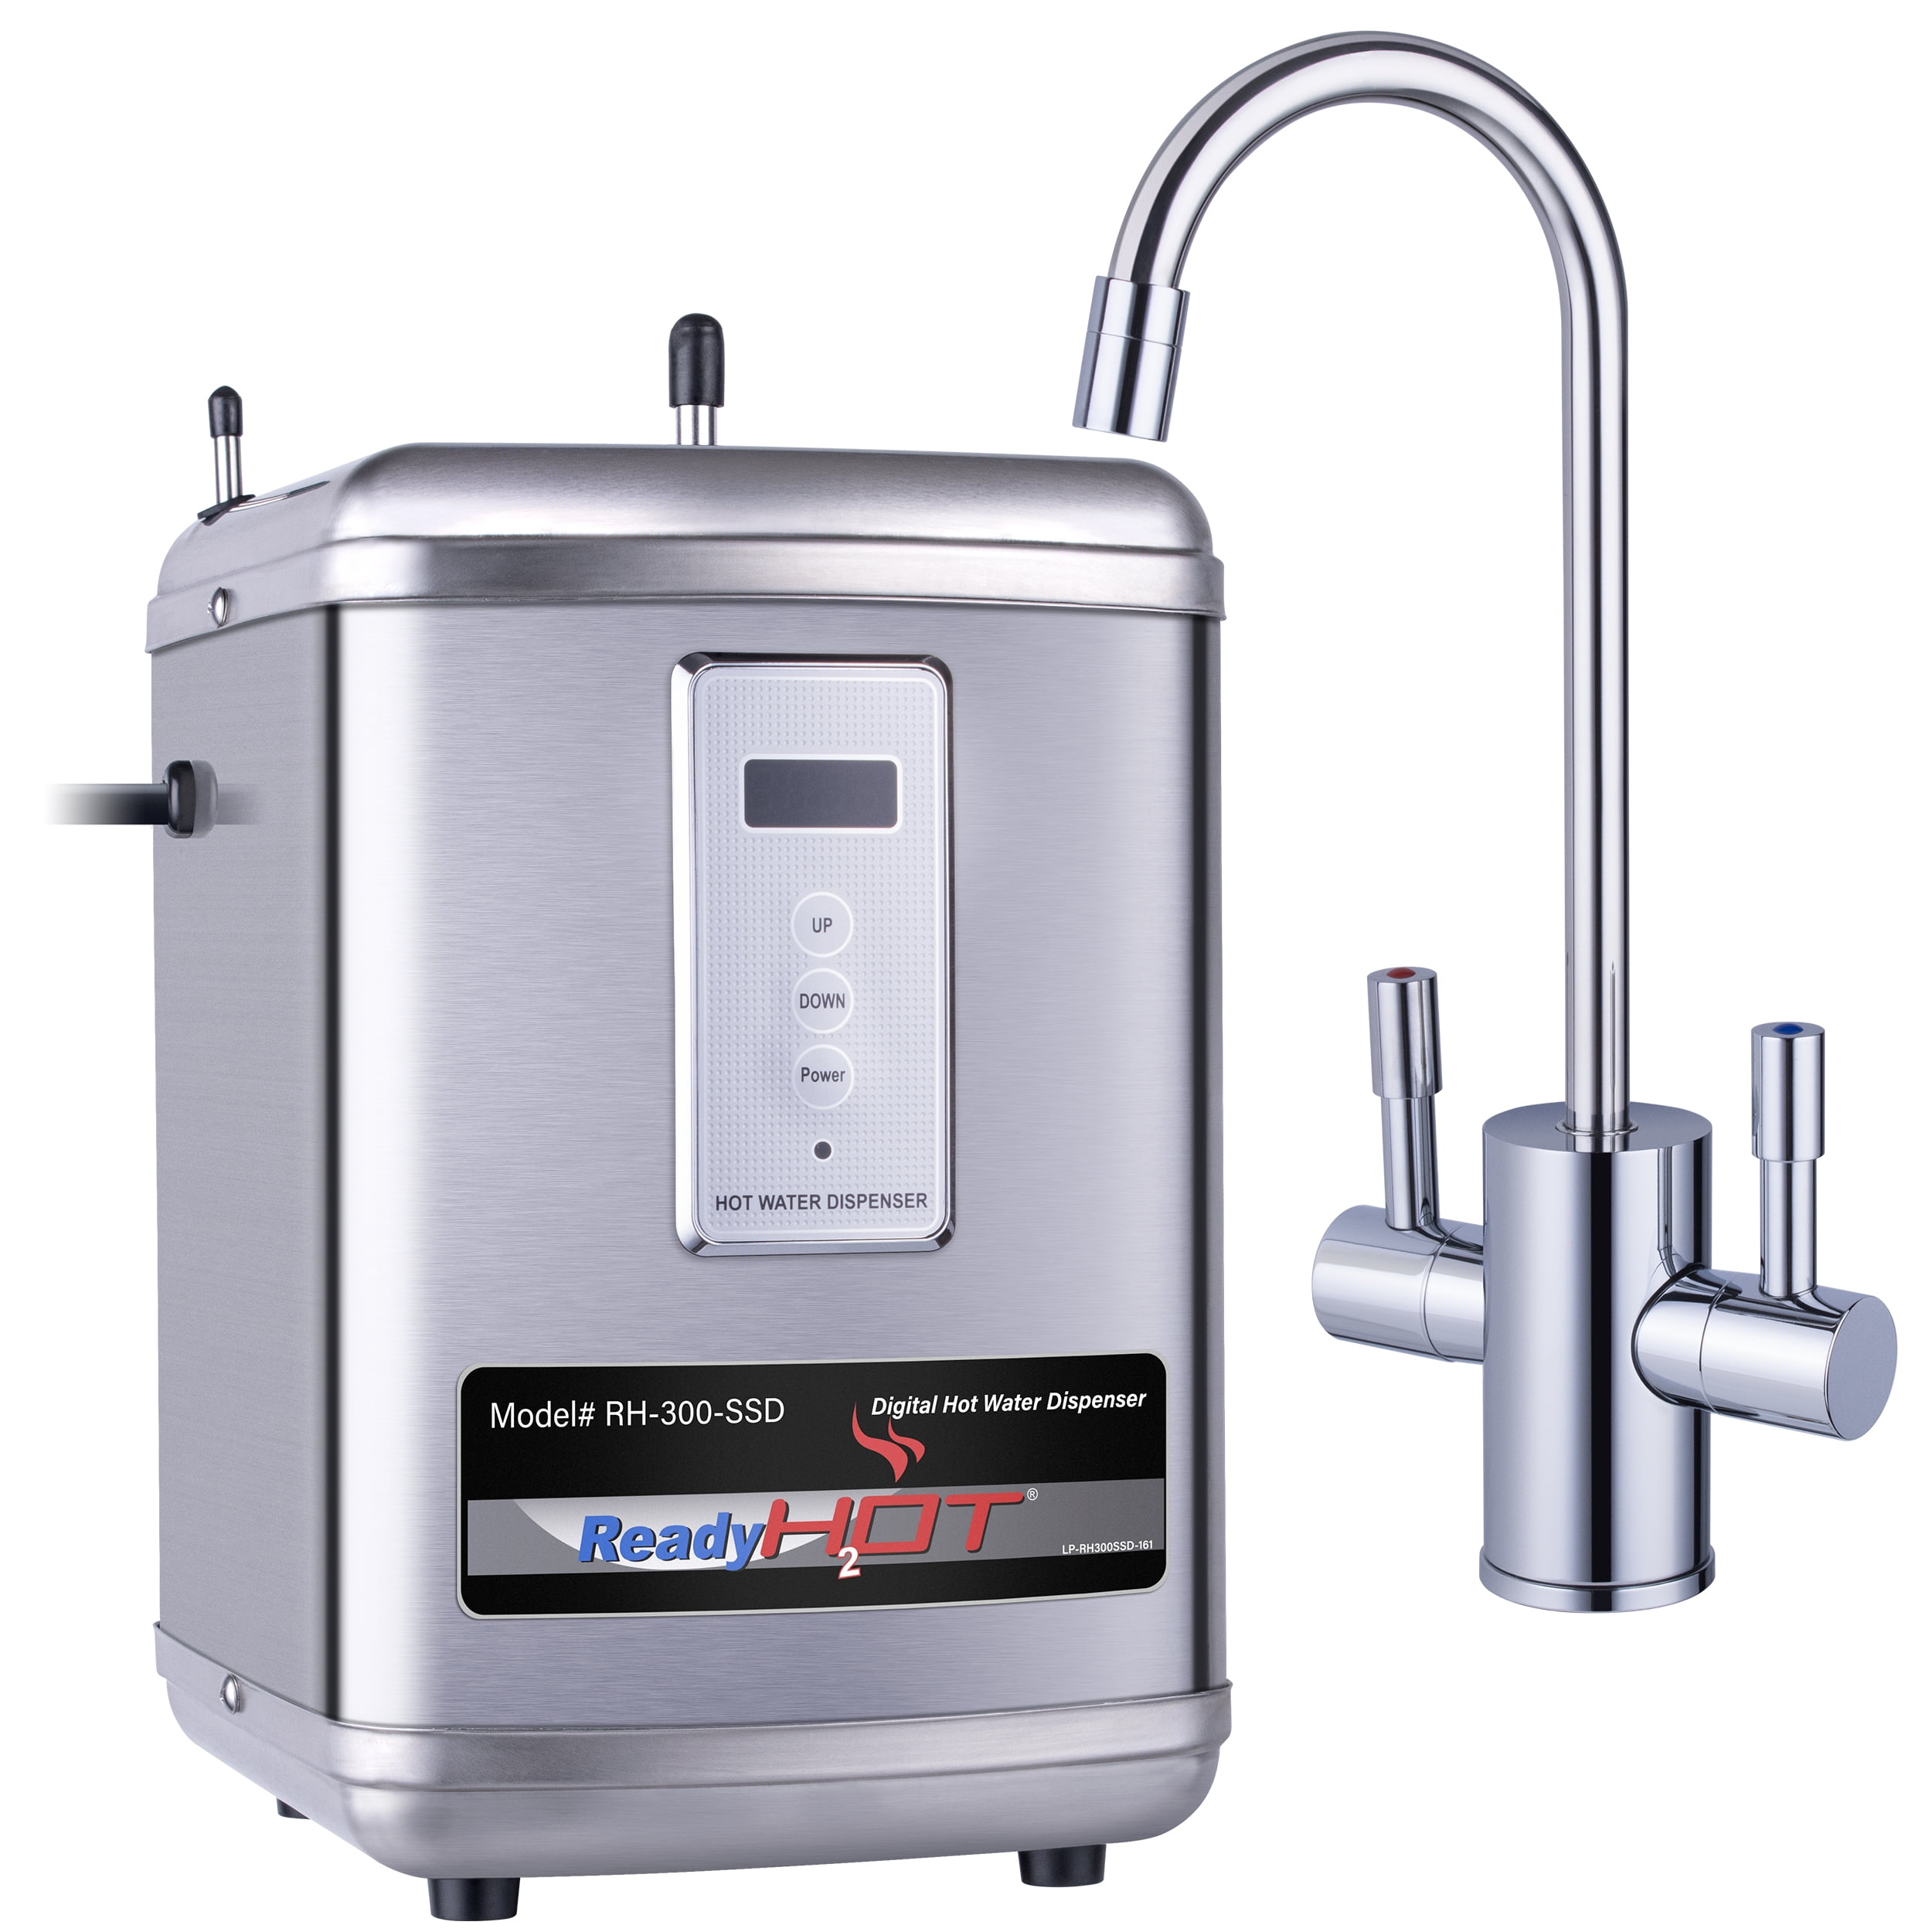 Ready Hot Instant Hot Water Dispenser, Digital Display, Includes Brushed Nickel Hot & Cold Faucet 41-rh-300-f560-bn, Size: 2.5 qt, Silver